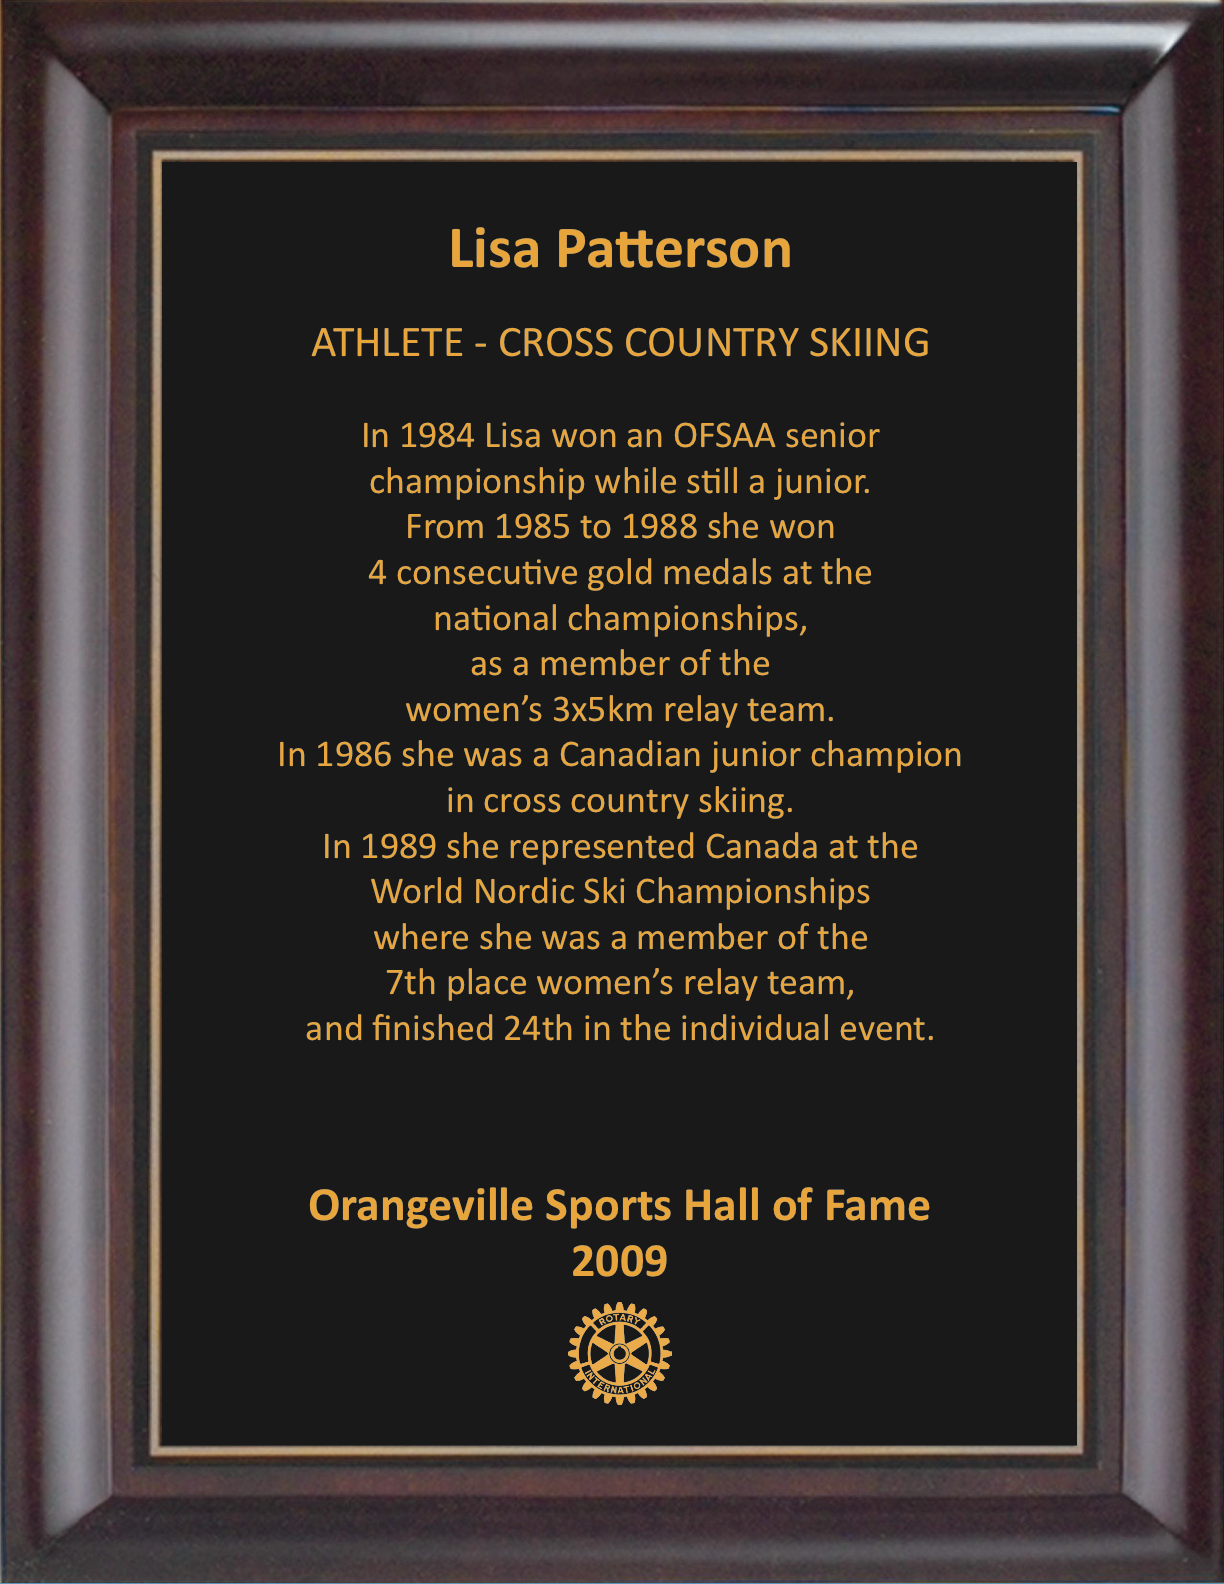 Lisa Patterson 2009 Hall of Fame Plaque